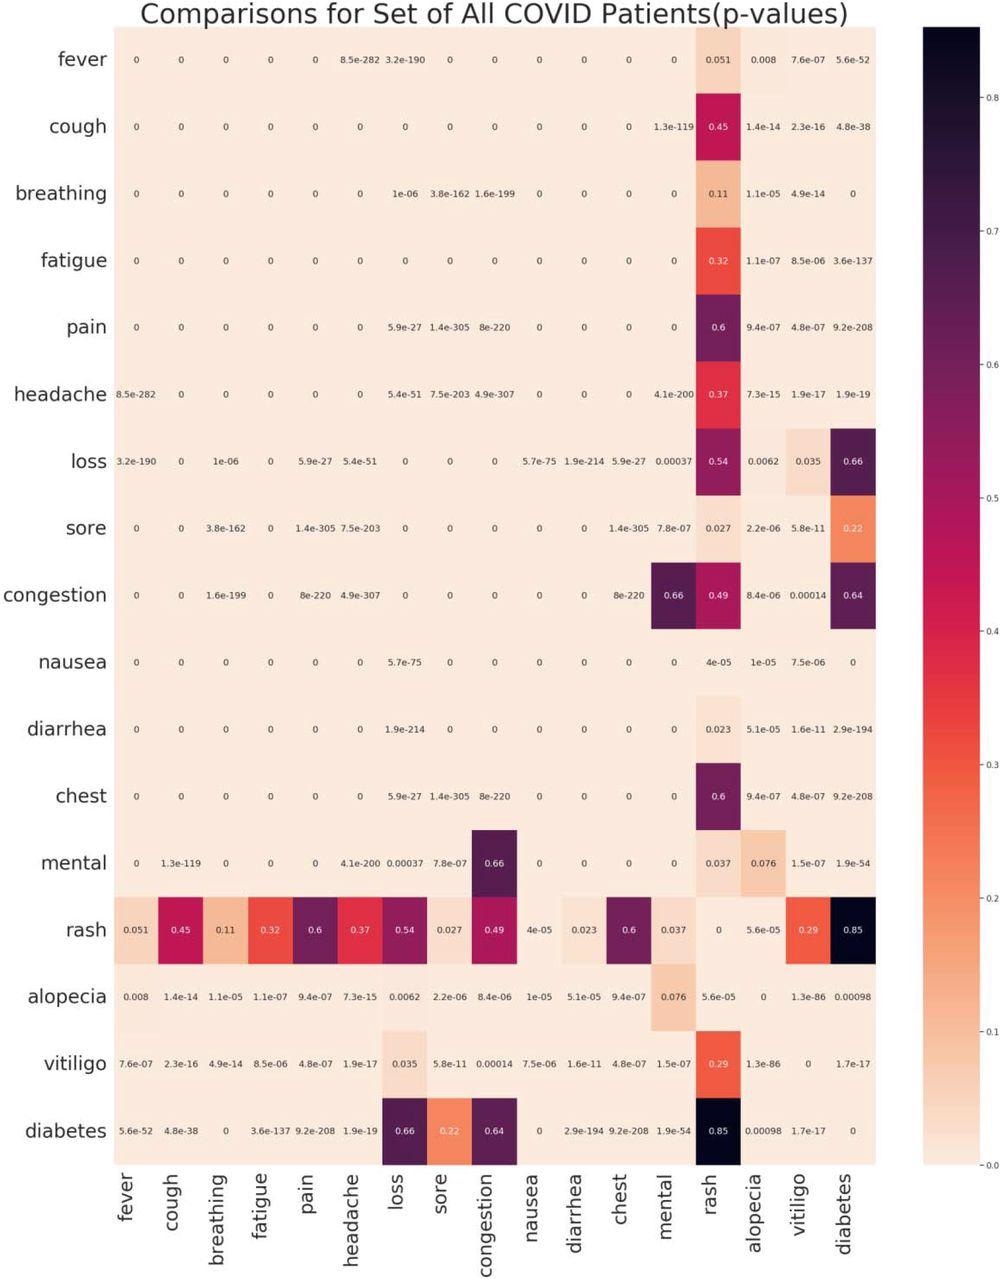 Heatmap of p-values in set of All COVID positive patients for comparison of all symptoms to every other symptom and comparison to each of the three immune groups (alopecia, vitiligo, and type 1 diabetes); color intensity increases with decreasing value; the following abbreviations were utilized: breathing (breathing abnormalities), loss (loss of taste/smell), chest (chest pain/pressure), mental (impairment of consciousness)